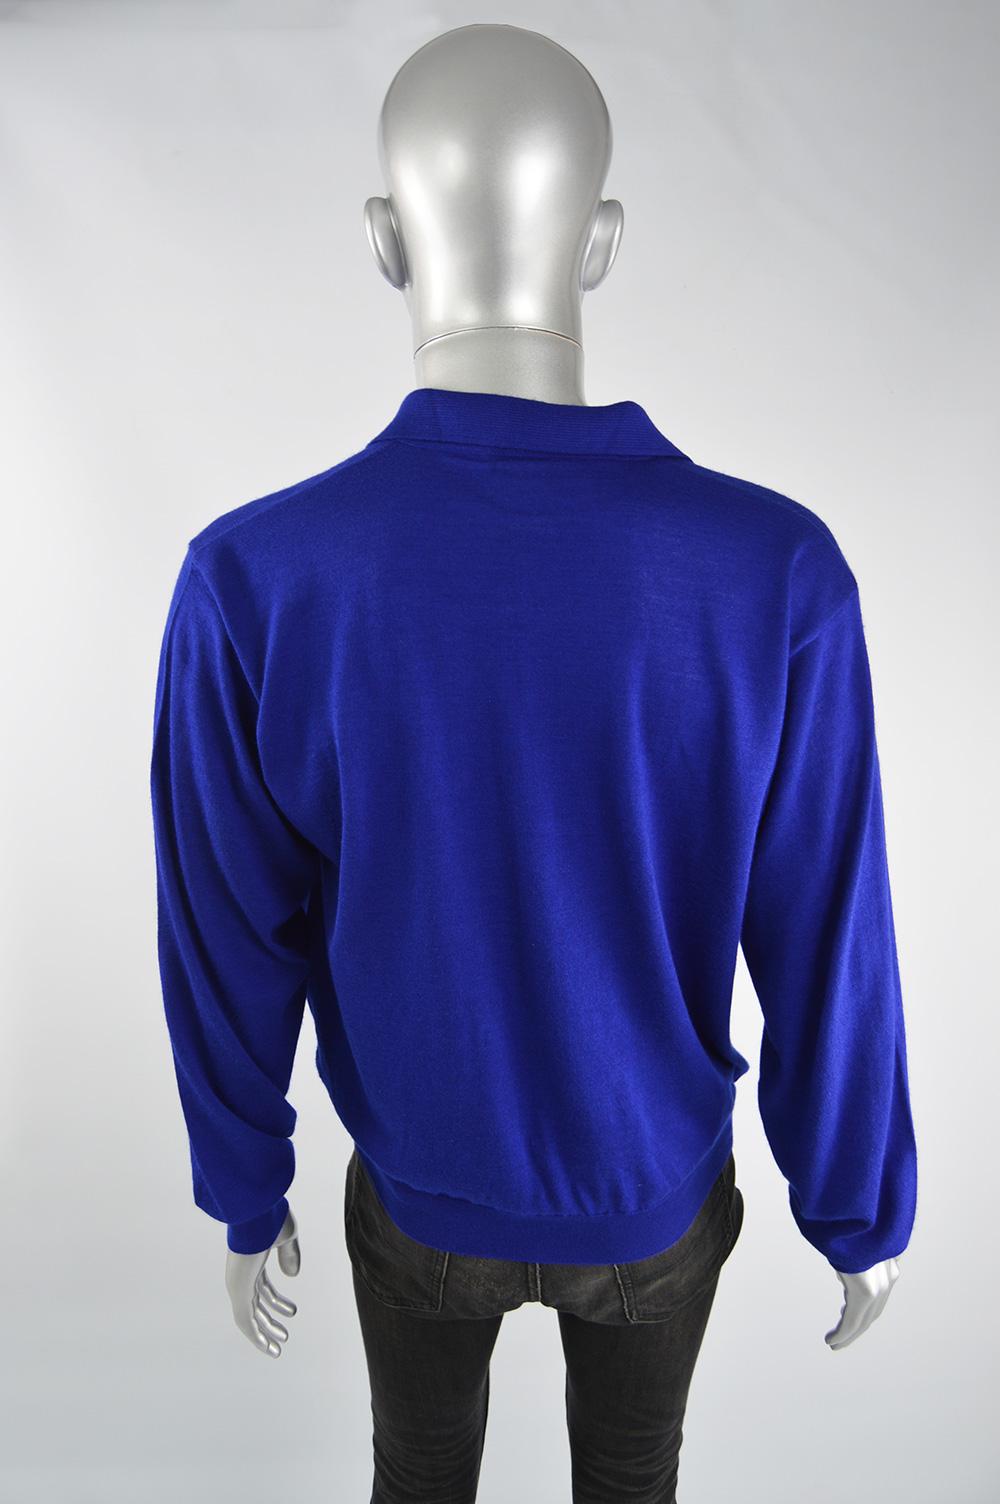 Men's Gianni Versace Mens Cashmere & Silk Royal Blue Vintage Collared Sweater, 1990s  For Sale